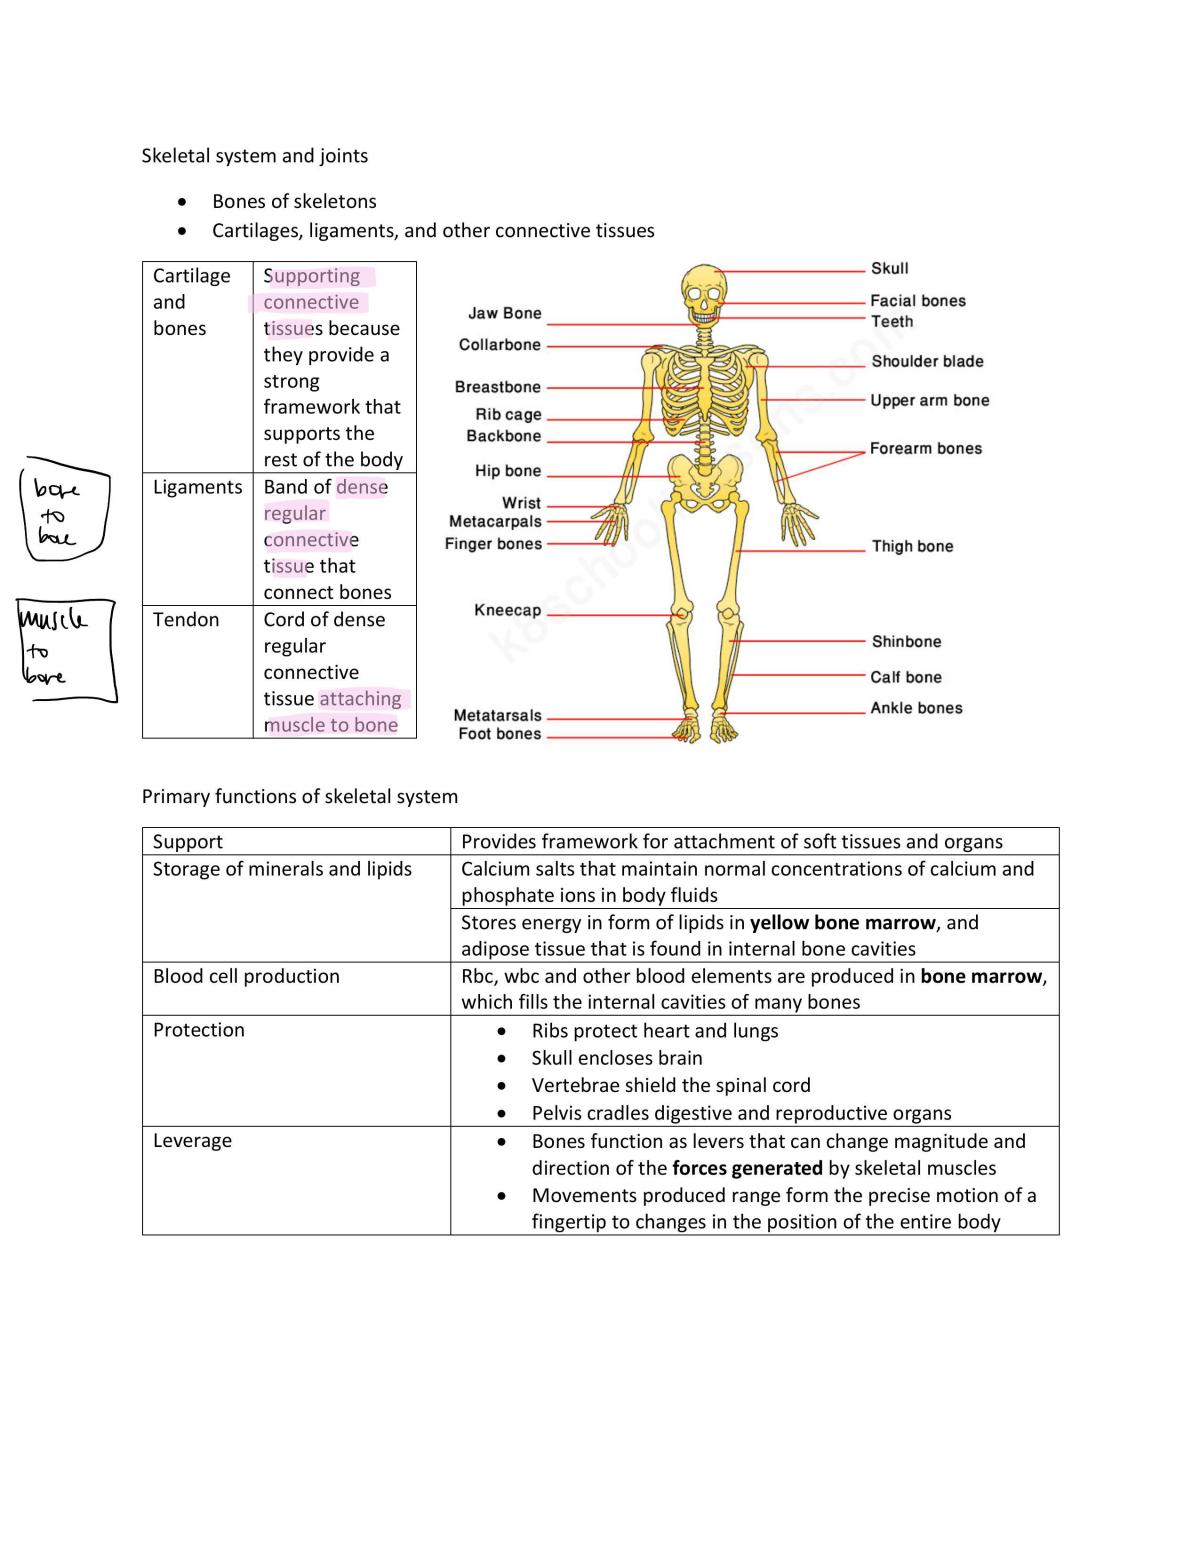 Lecture 2 Skeletal System and Joints - Page 1